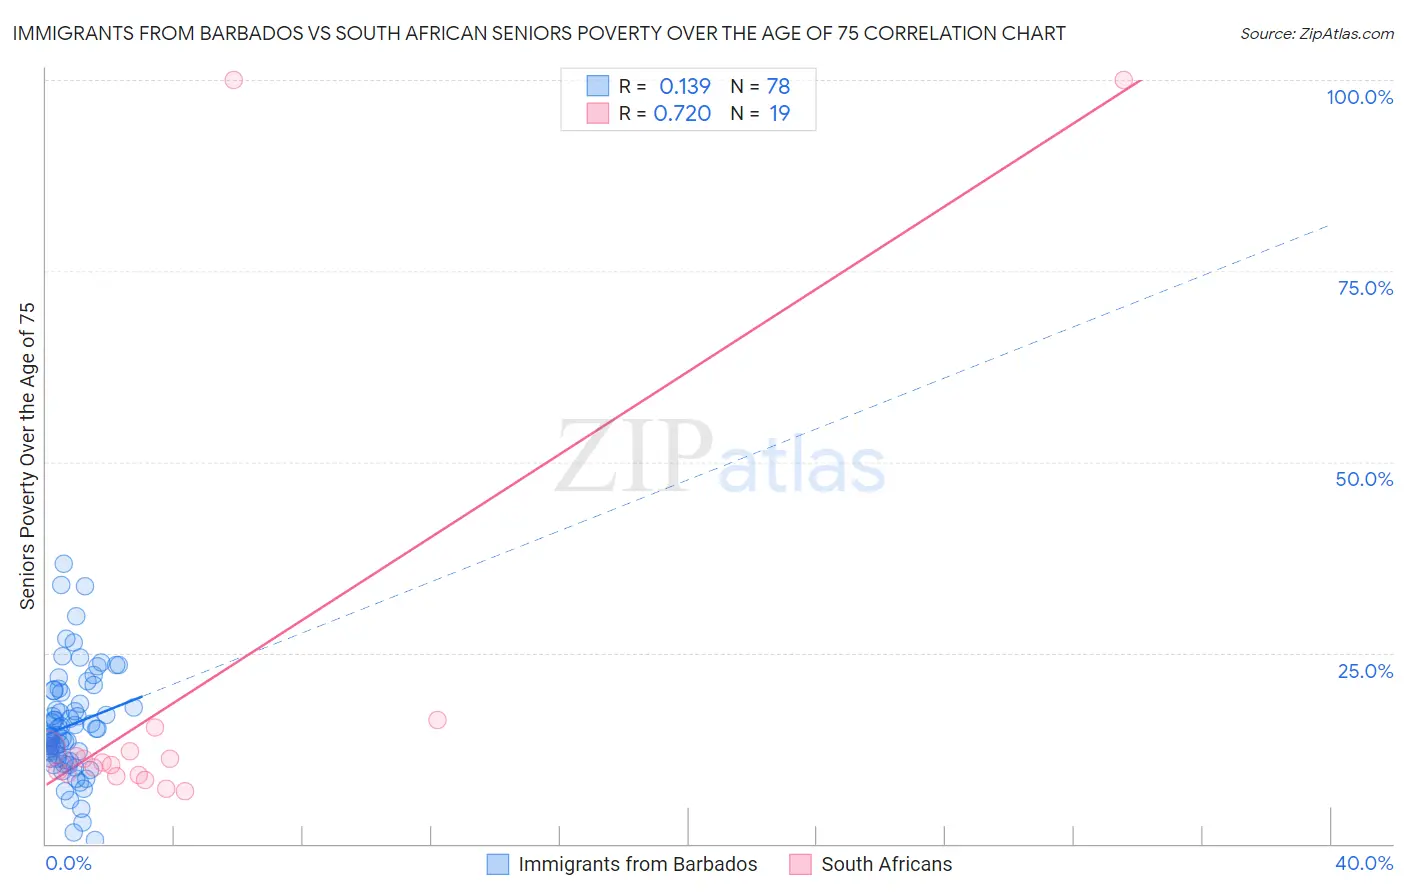 Immigrants from Barbados vs South African Seniors Poverty Over the Age of 75